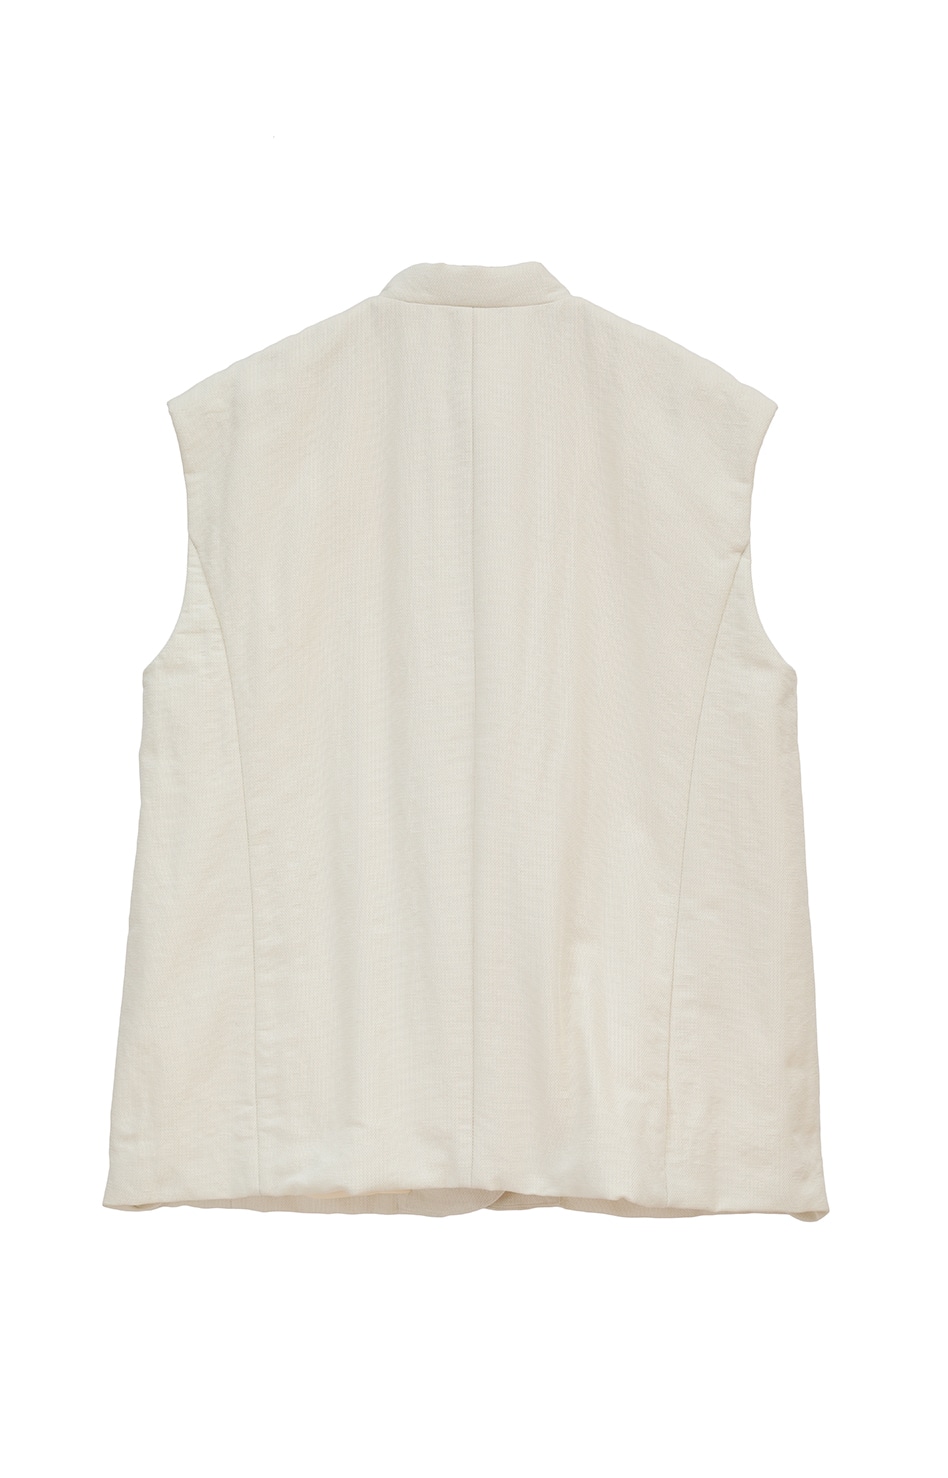 PADDED MESH VEST｜OUTER(アウター)｜CLANE OFFICIAL ONLINE STORE